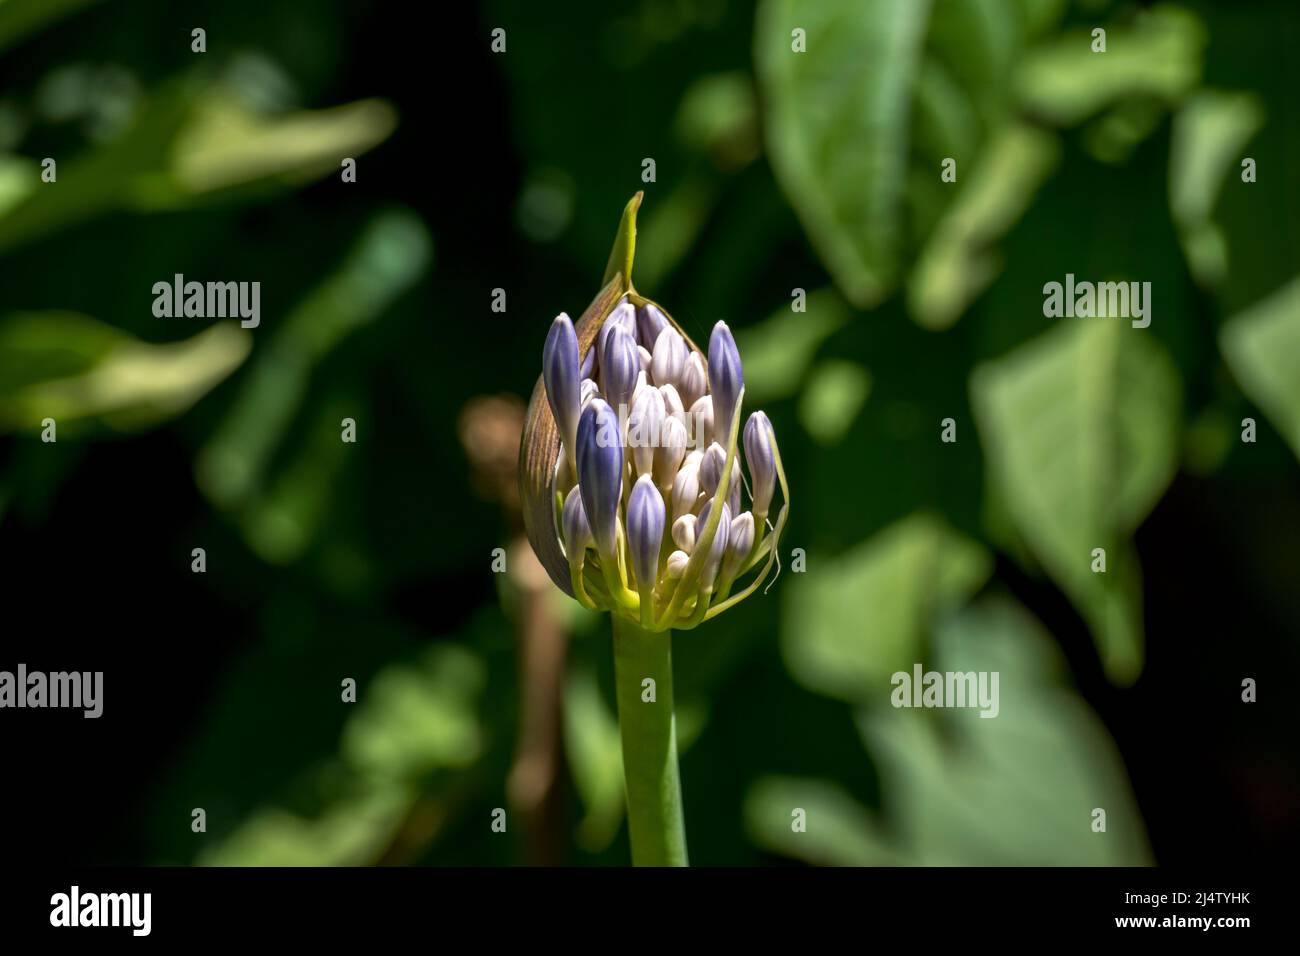 close-up of the bud of an agapanthus Stock Photo